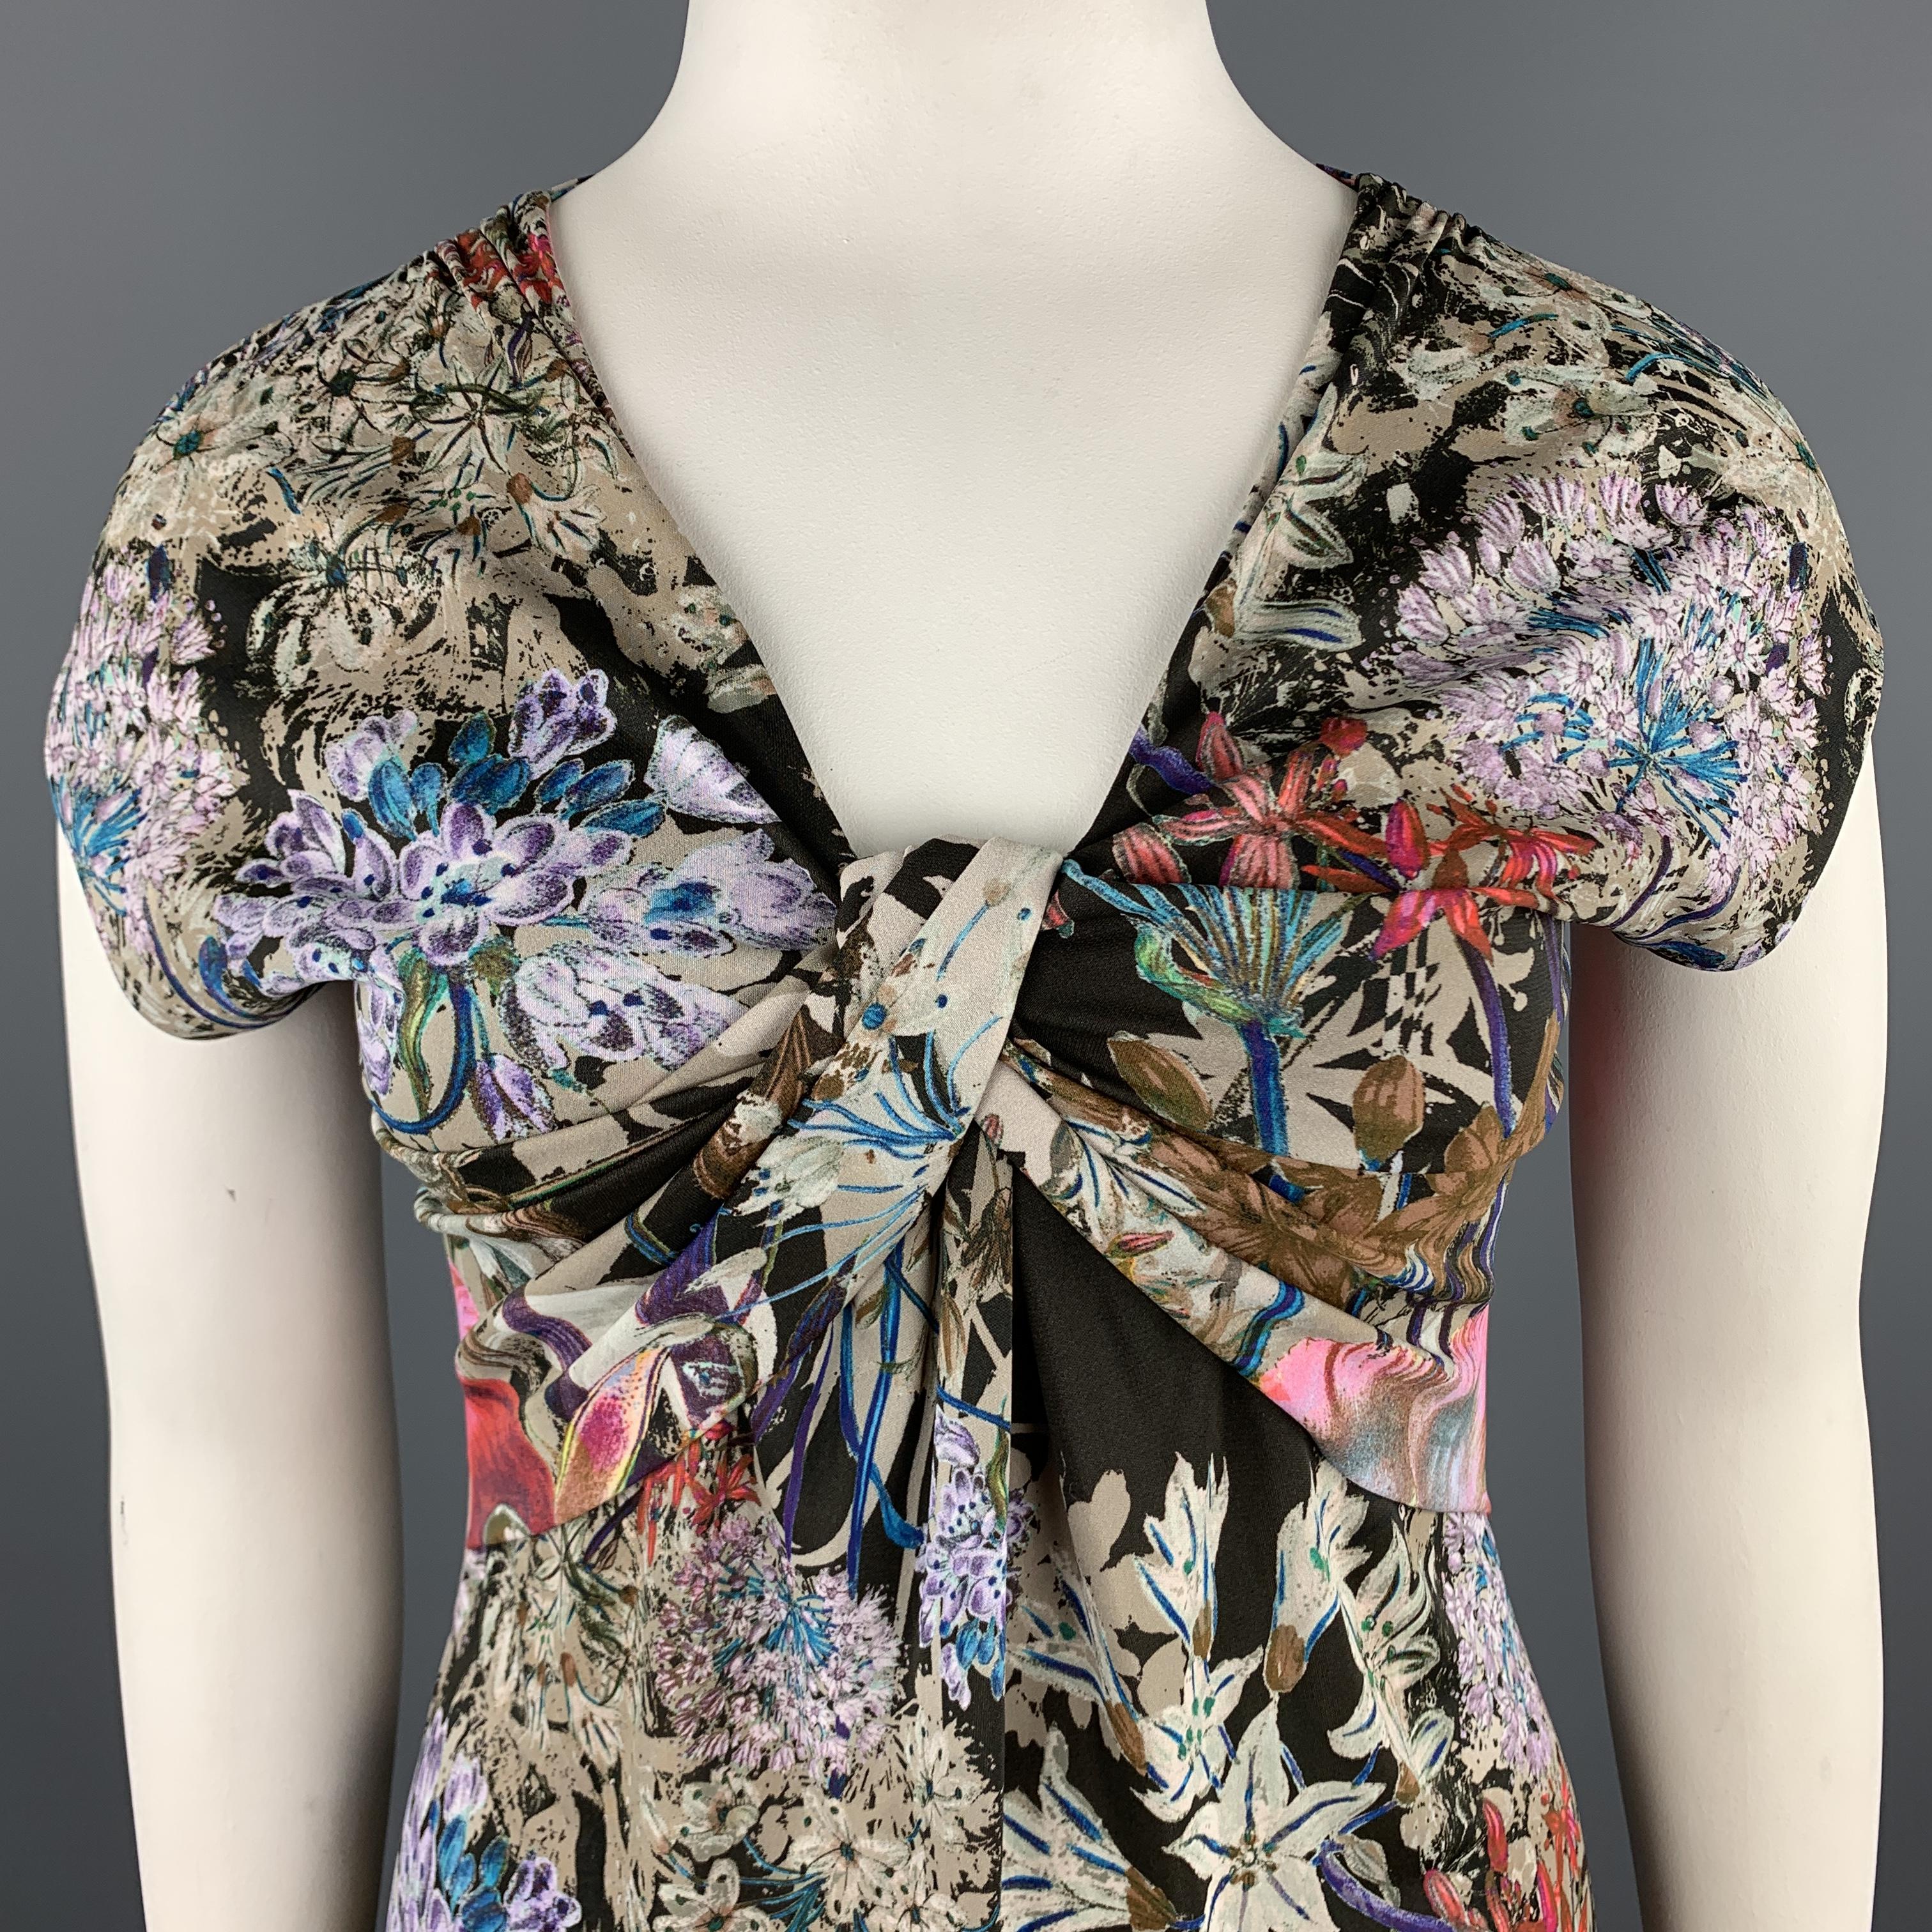 ETRO blouse coms in floral print jersey with a V neck, cap sleeves, and draped front. Made in Italy.

Excellent Pre-Owned Condition.
Marked: IT 48

Measurements:

Shoulder: 21 in.
Bust: 38 in.
Length: 28 in.